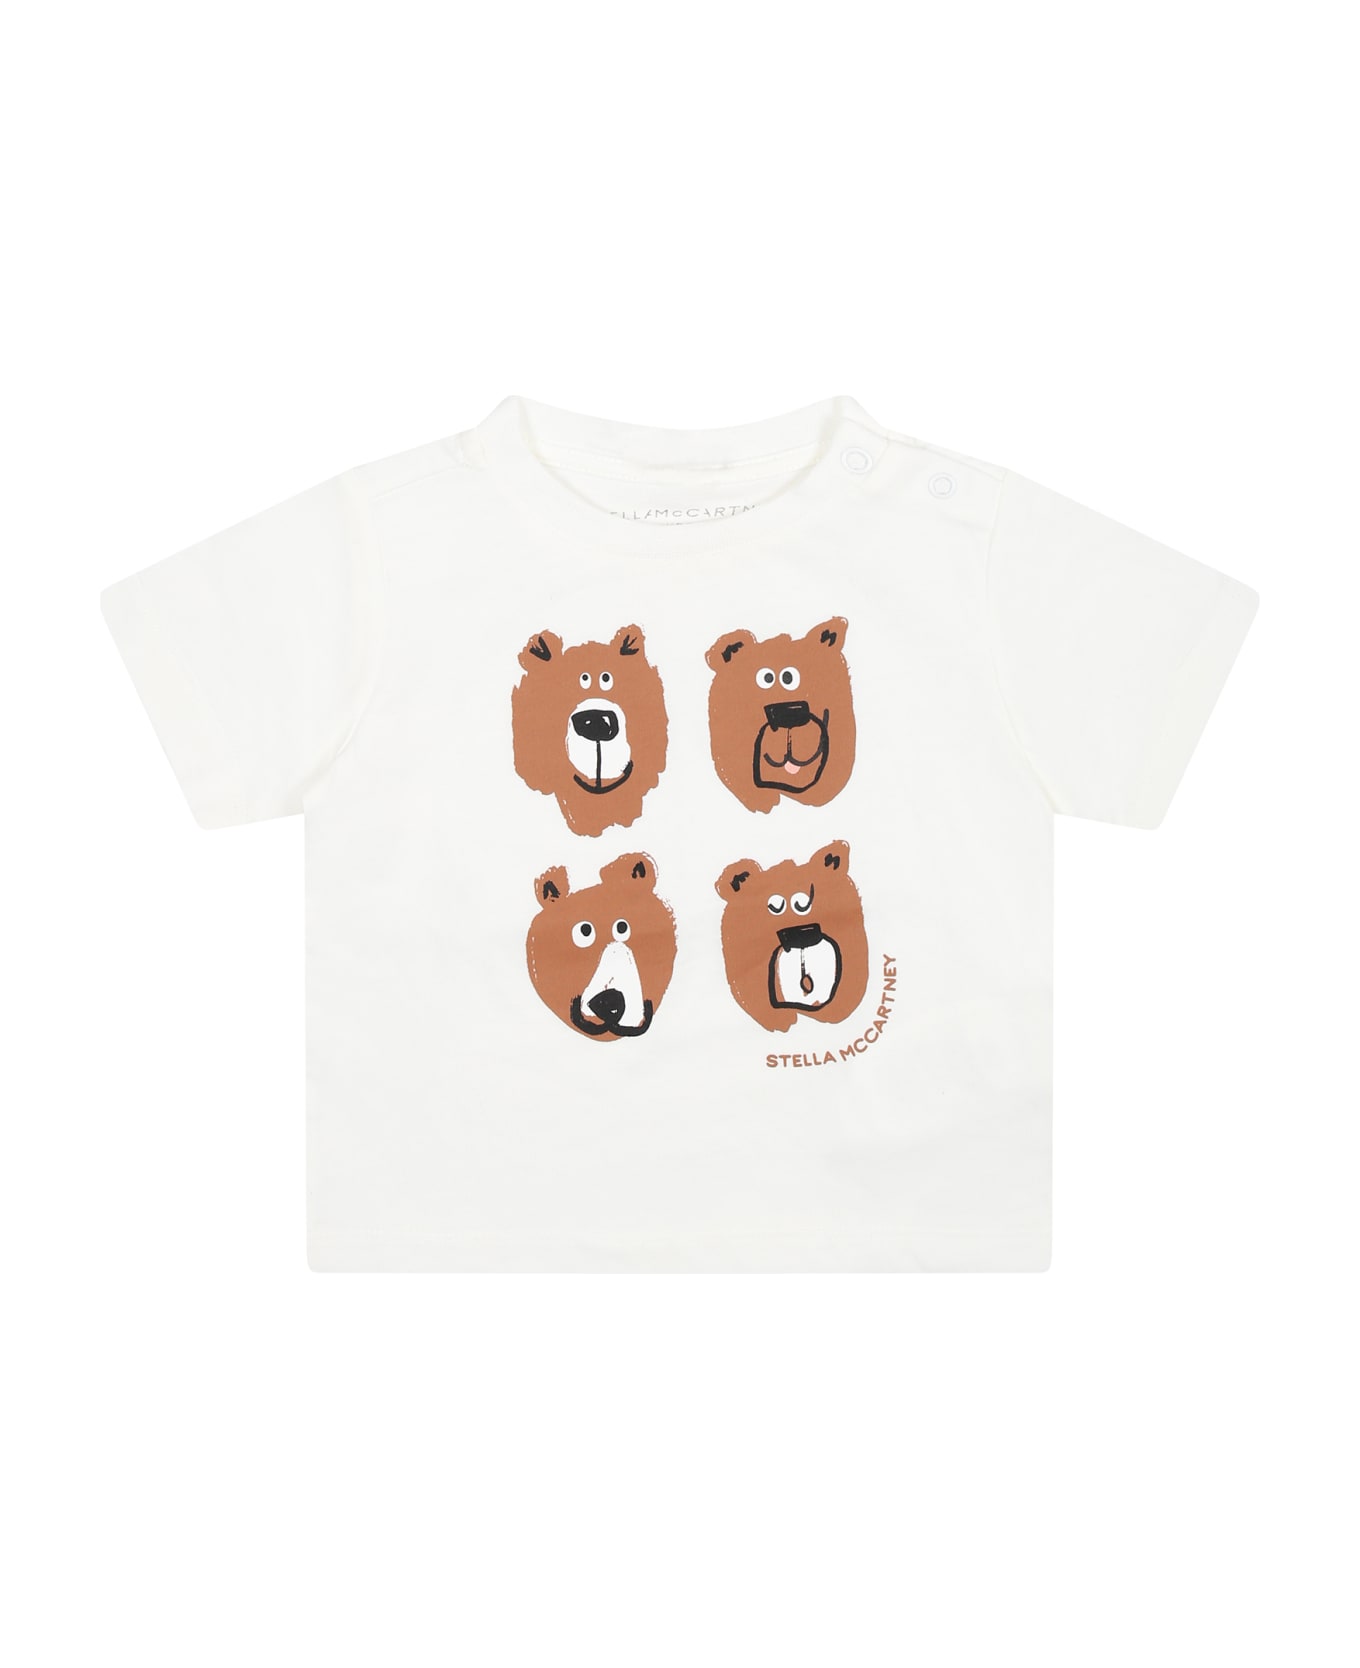 Stella McCartney Kids Ivory T-shirt For Baby Girl With Bears - Ivory